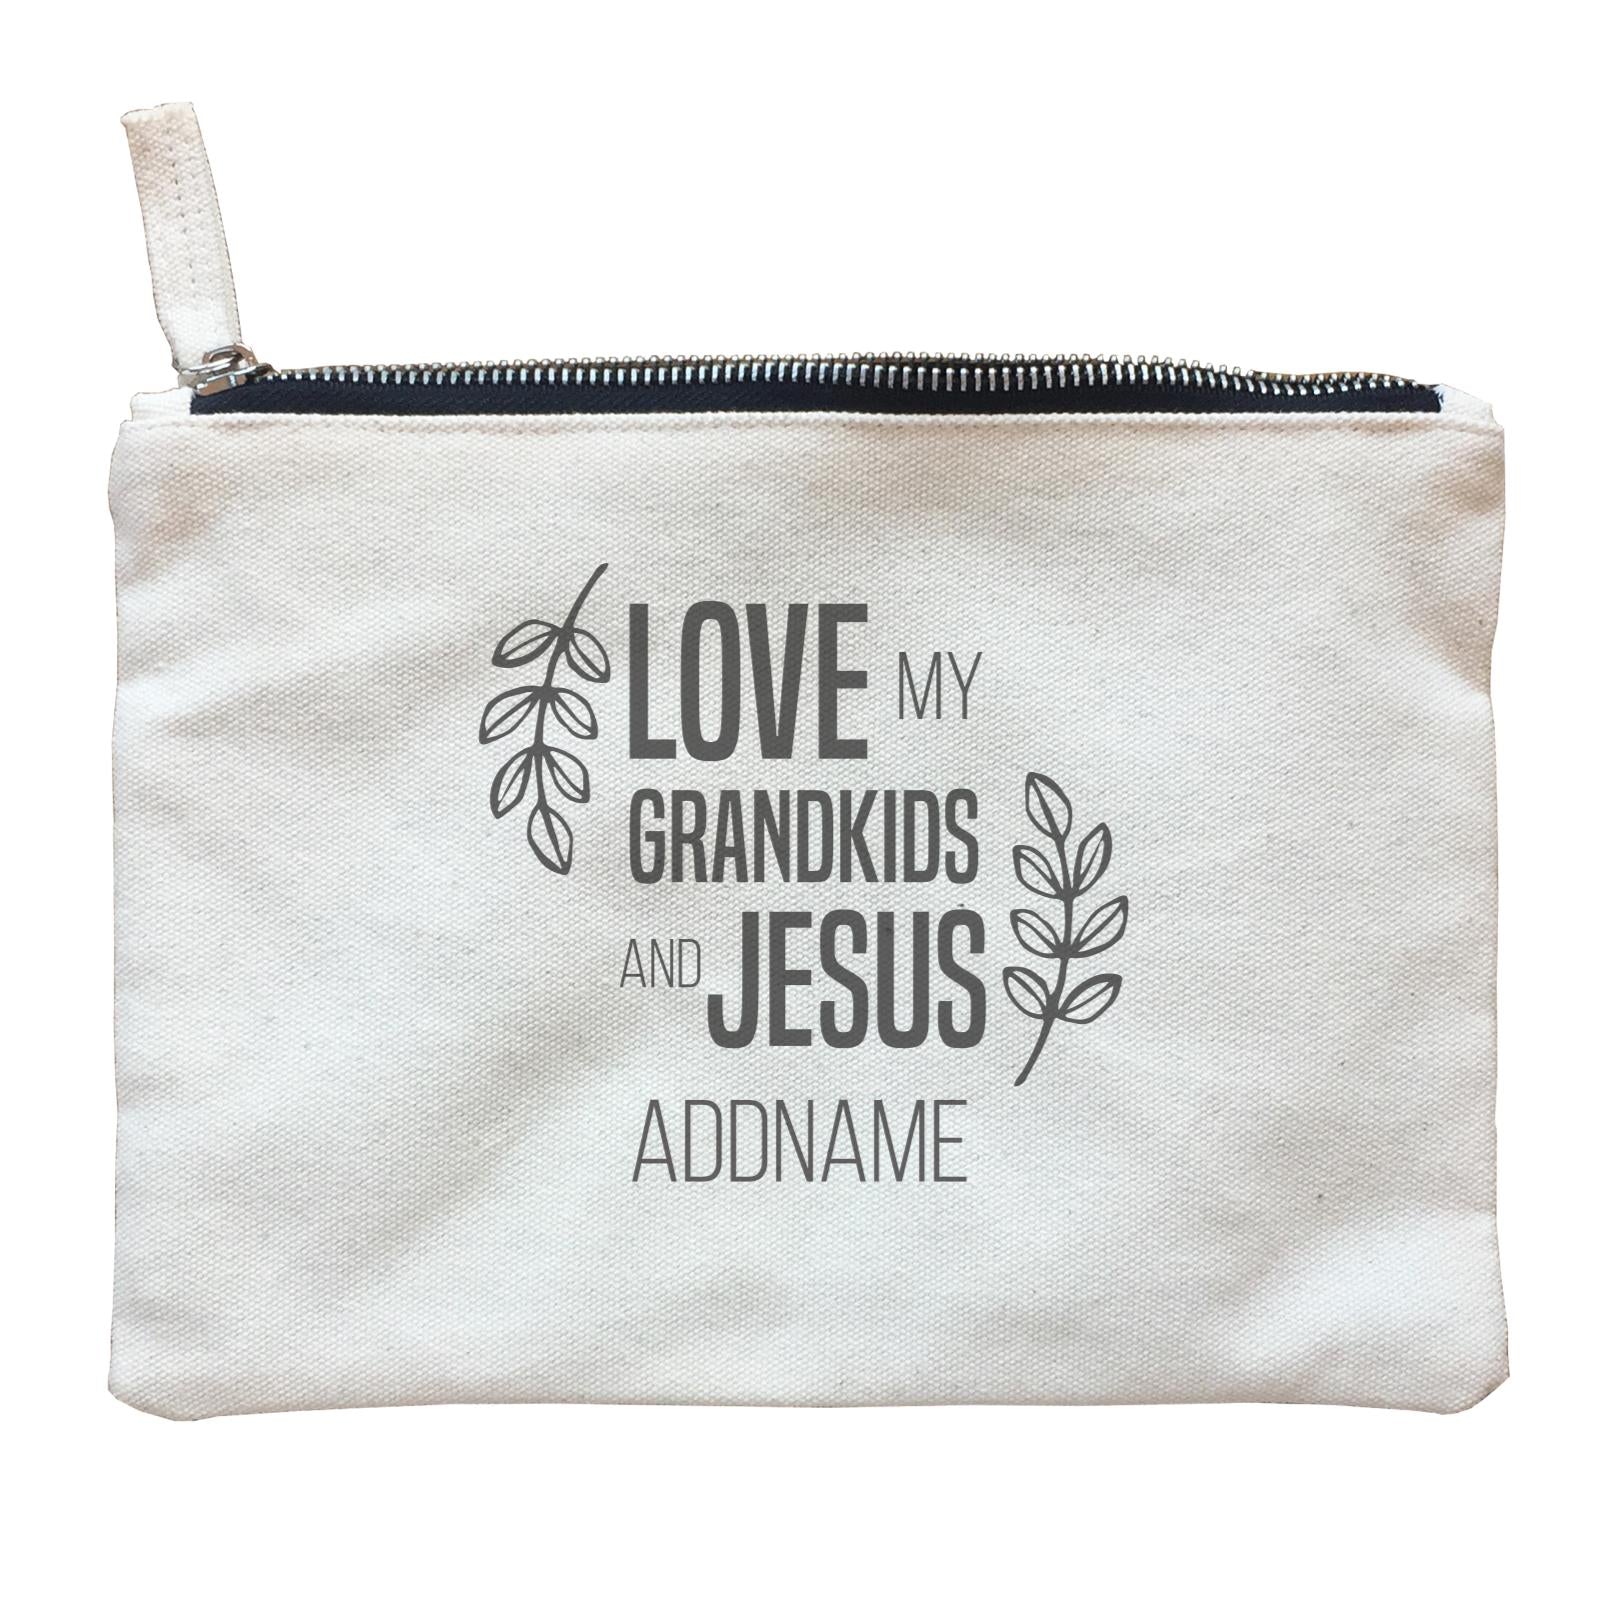 Christian Series Love My Grandkids And Jesus Addname Zipper Pouch